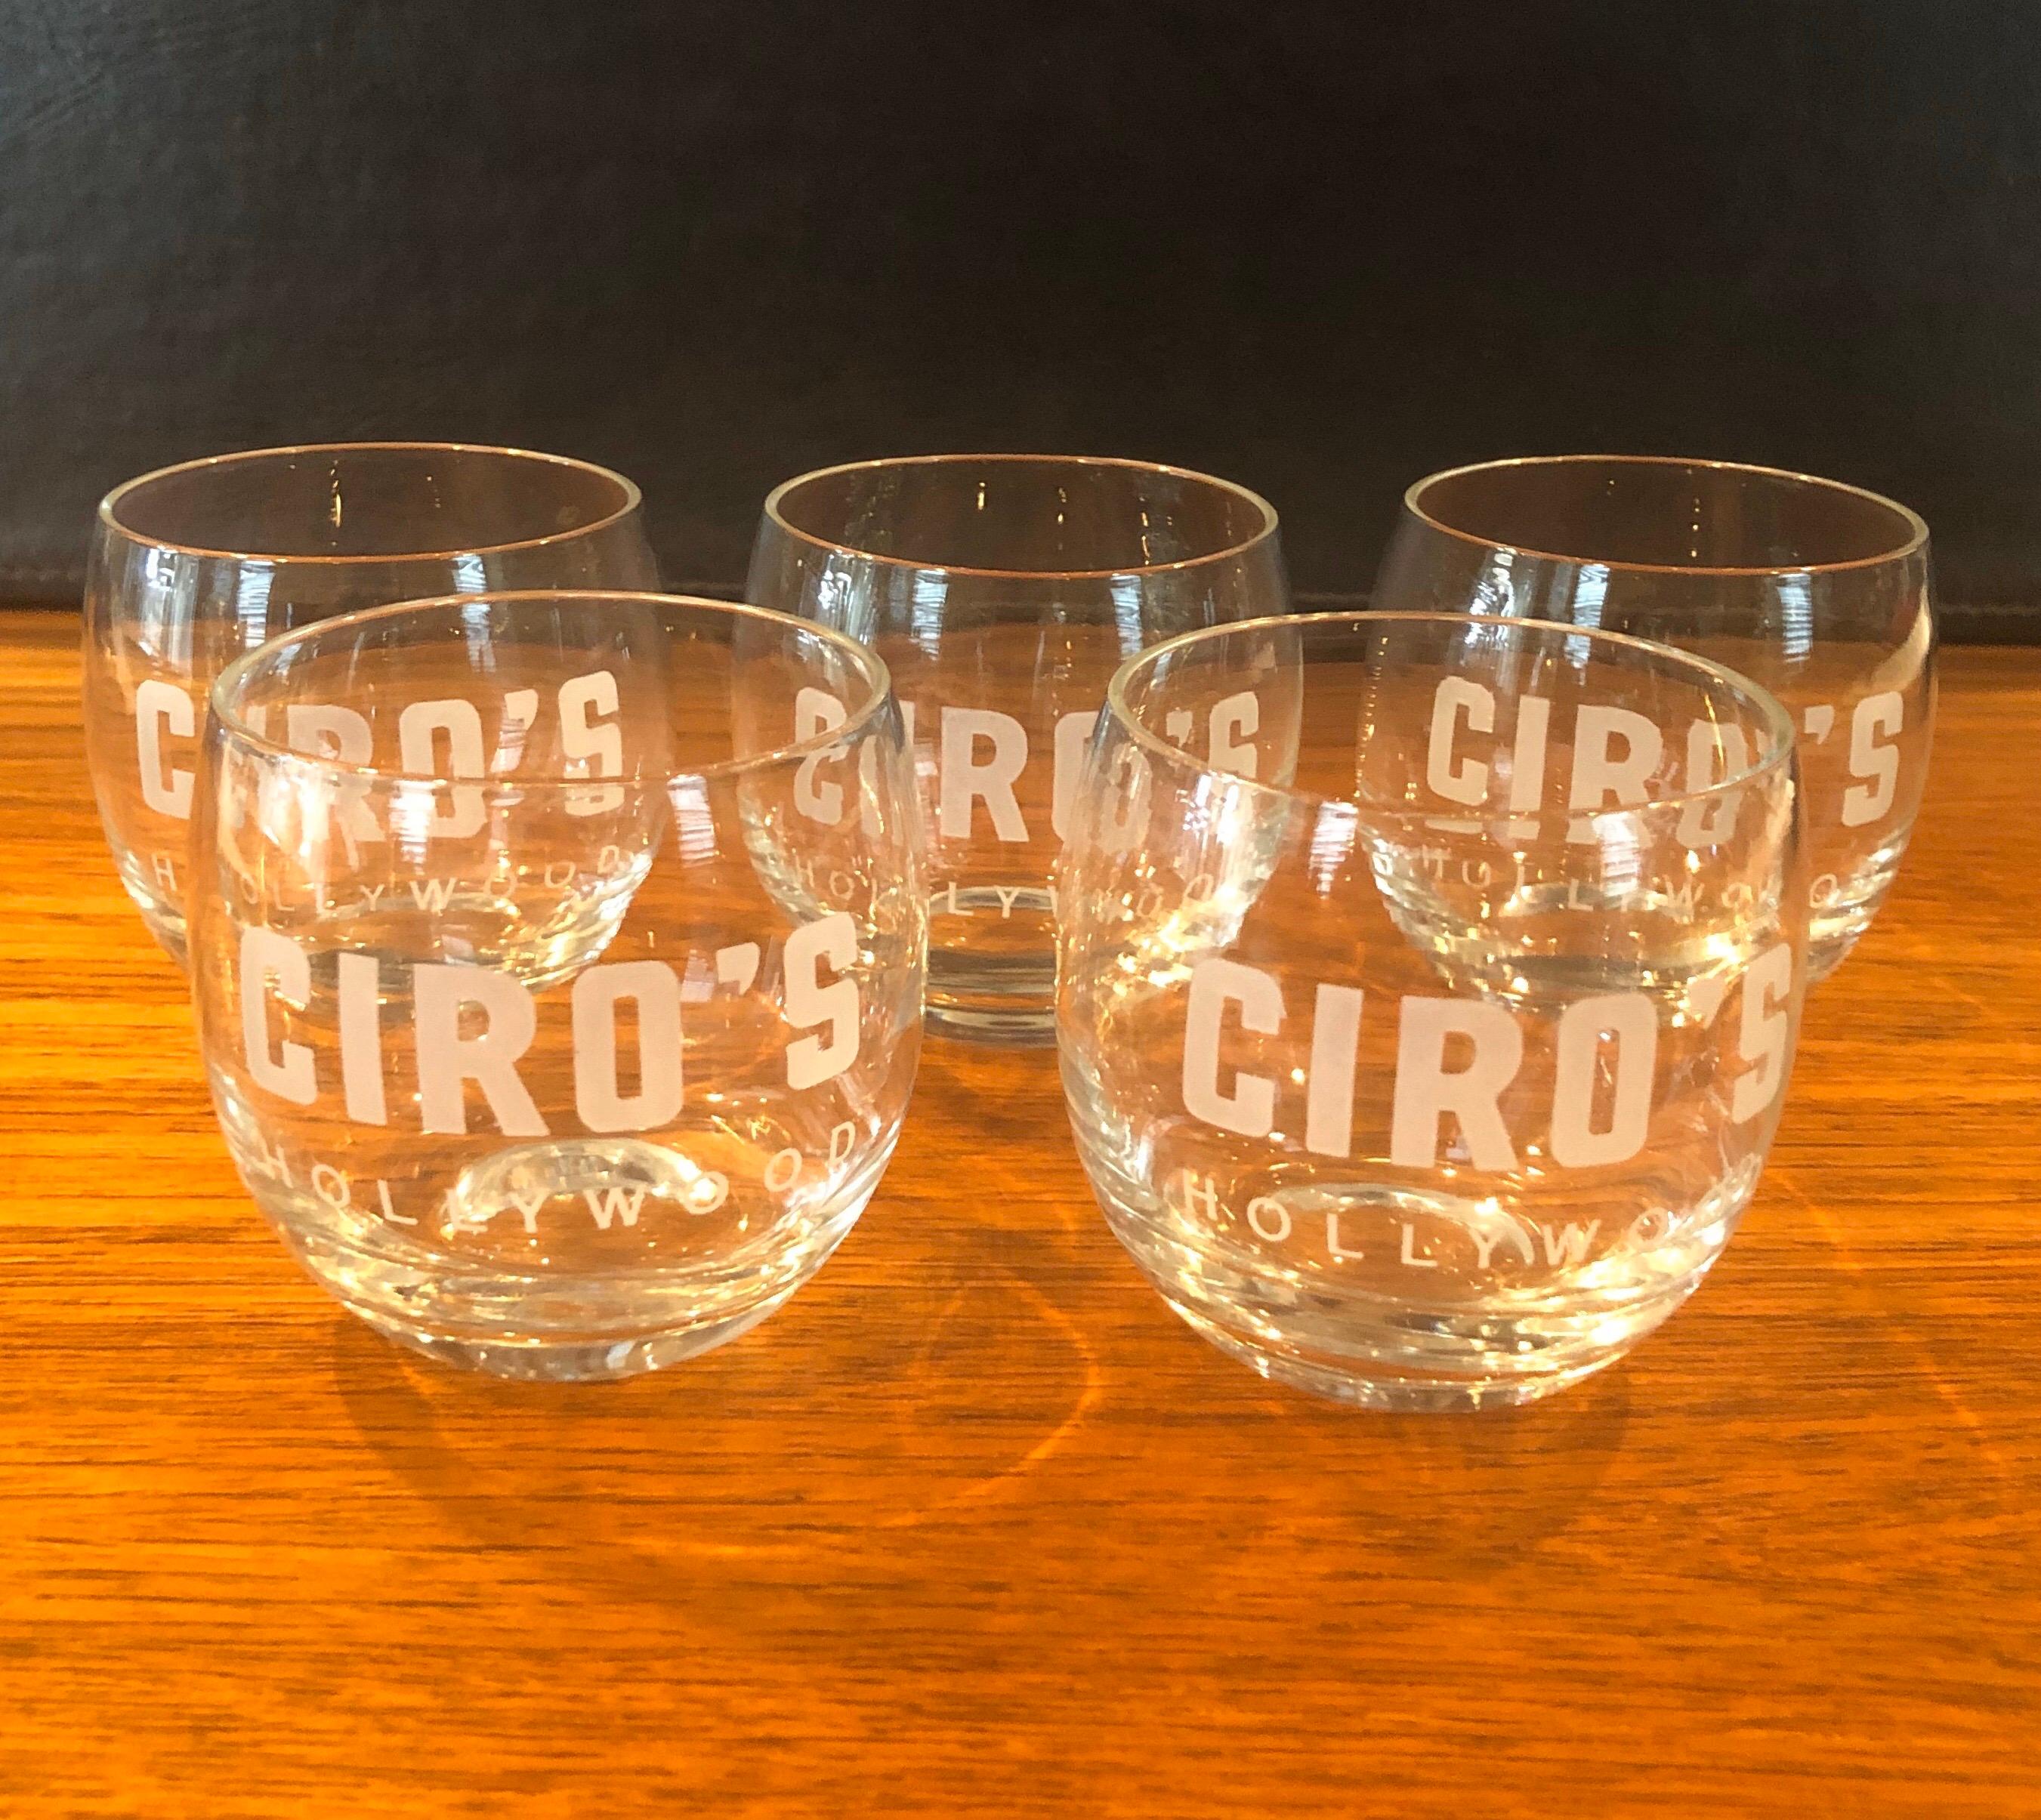 Great set of five double old fashioned glasses (12oz) from Ciro's Hollywood, circa 1950s. These super rare cocktail glasses are round clear glass with 